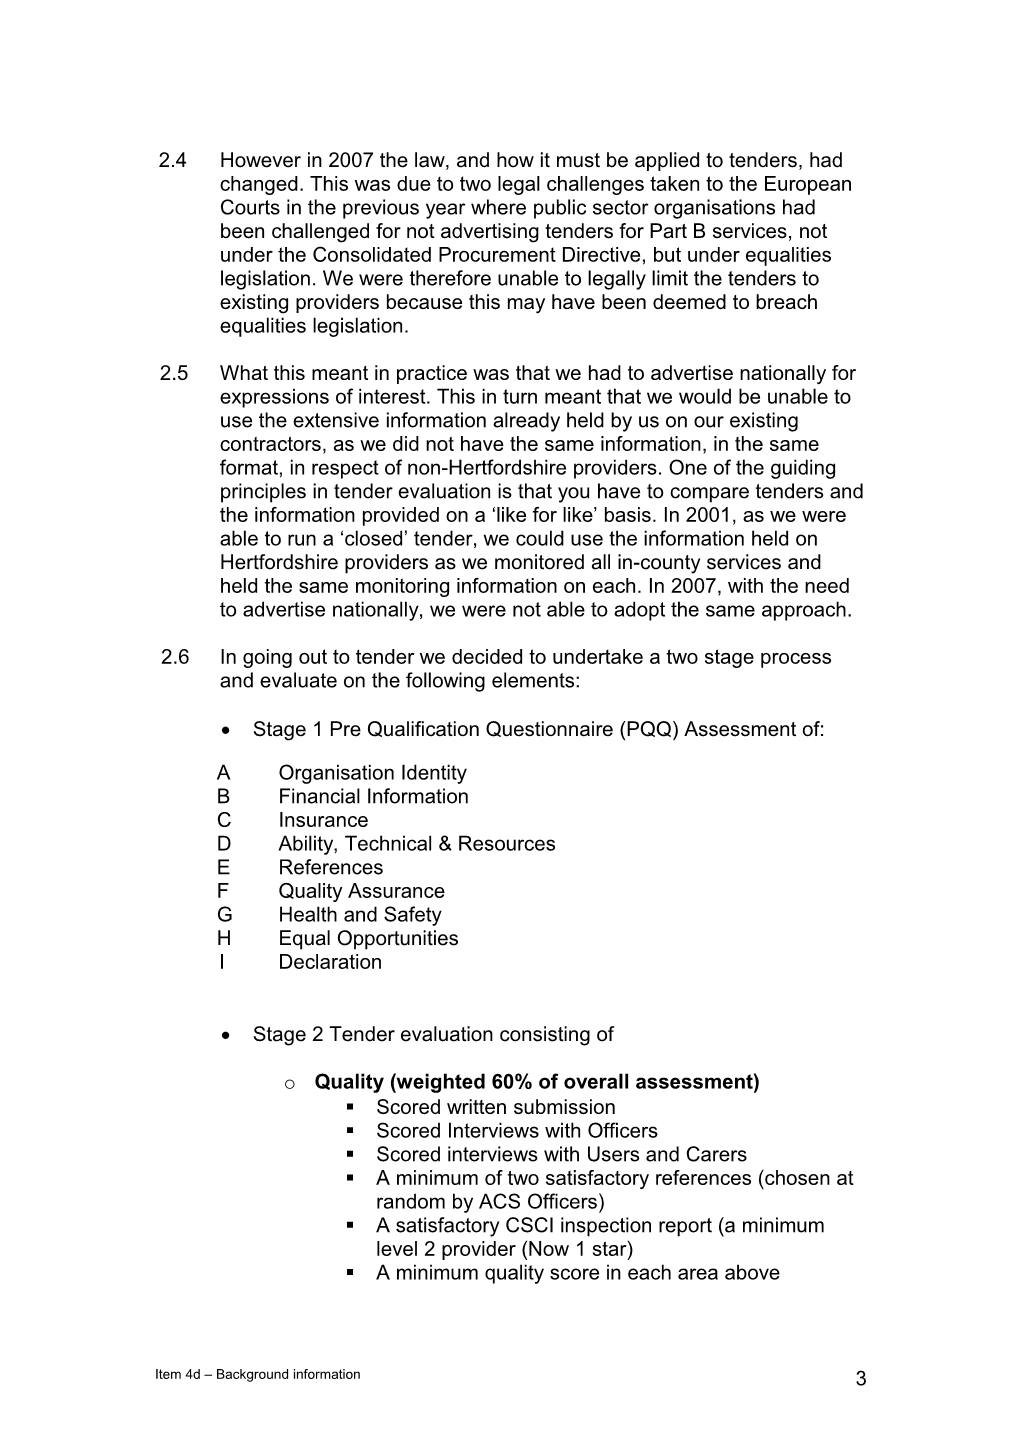 Home Care Contract Procurement Process Topic Group 28 & 29 August 2008 Item 4(D) - Background